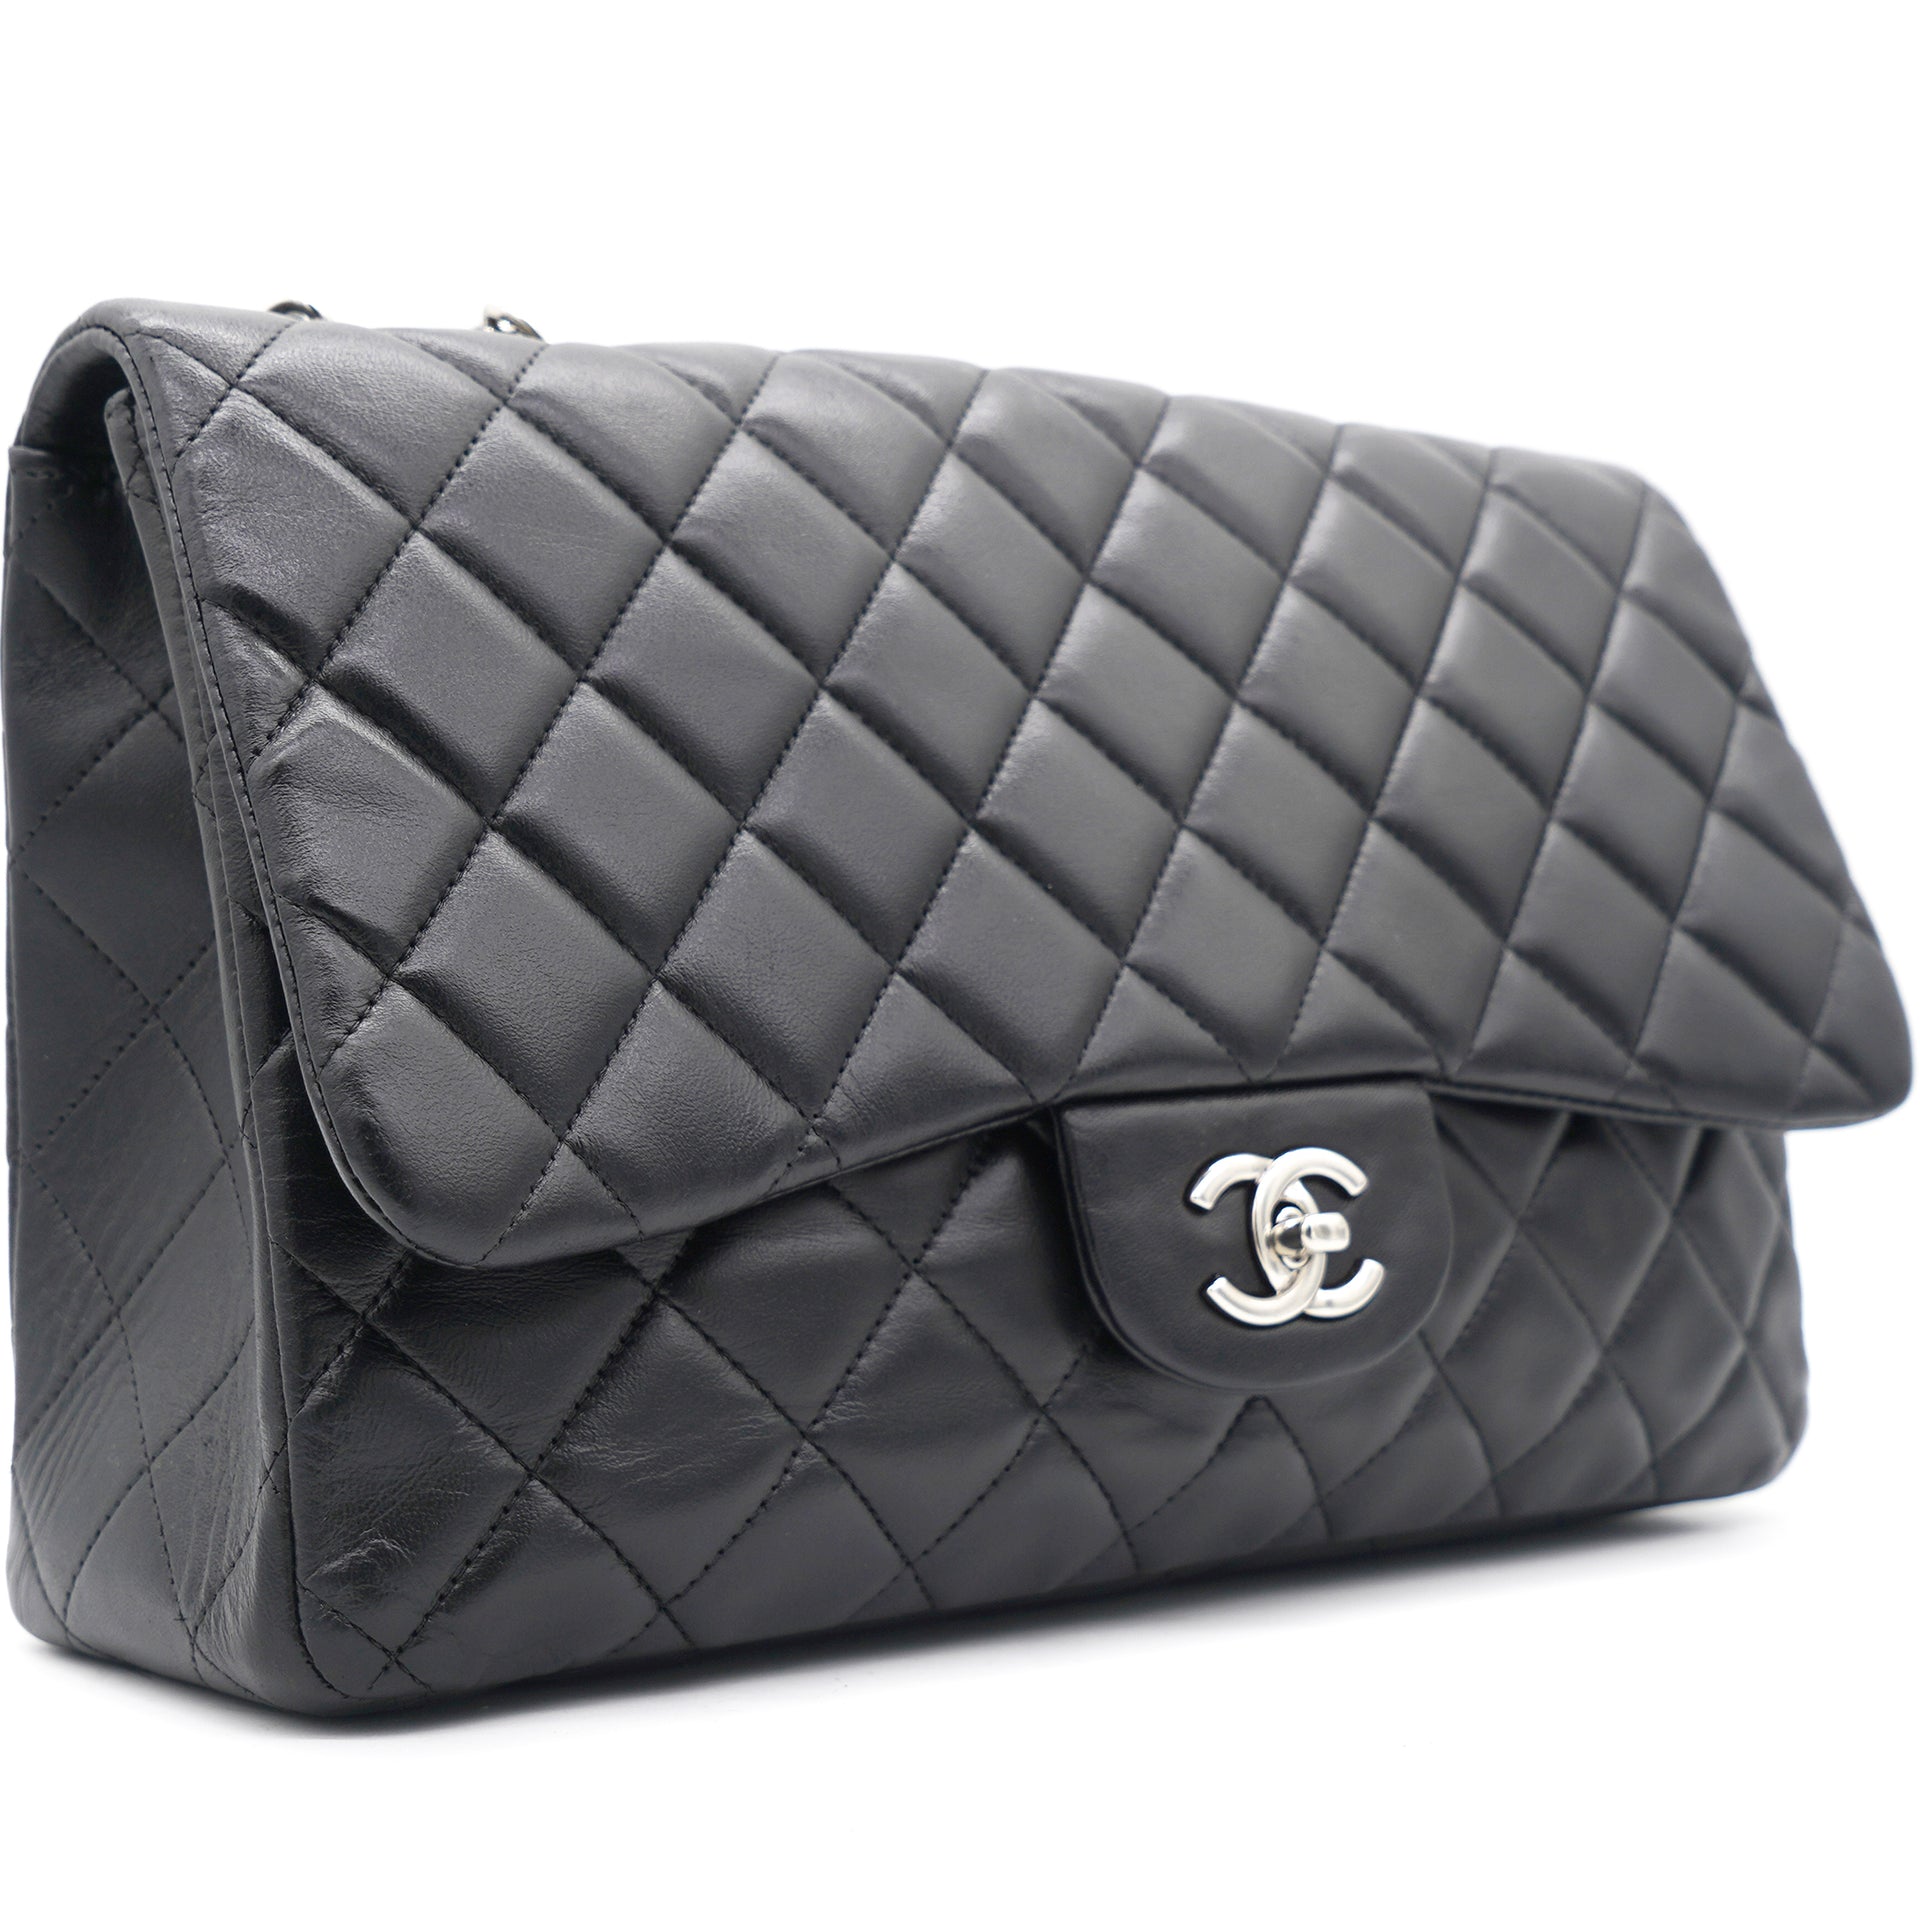 CHANEL Classic Black Quilted Caviar SHW Silver Chain Jumbo Large